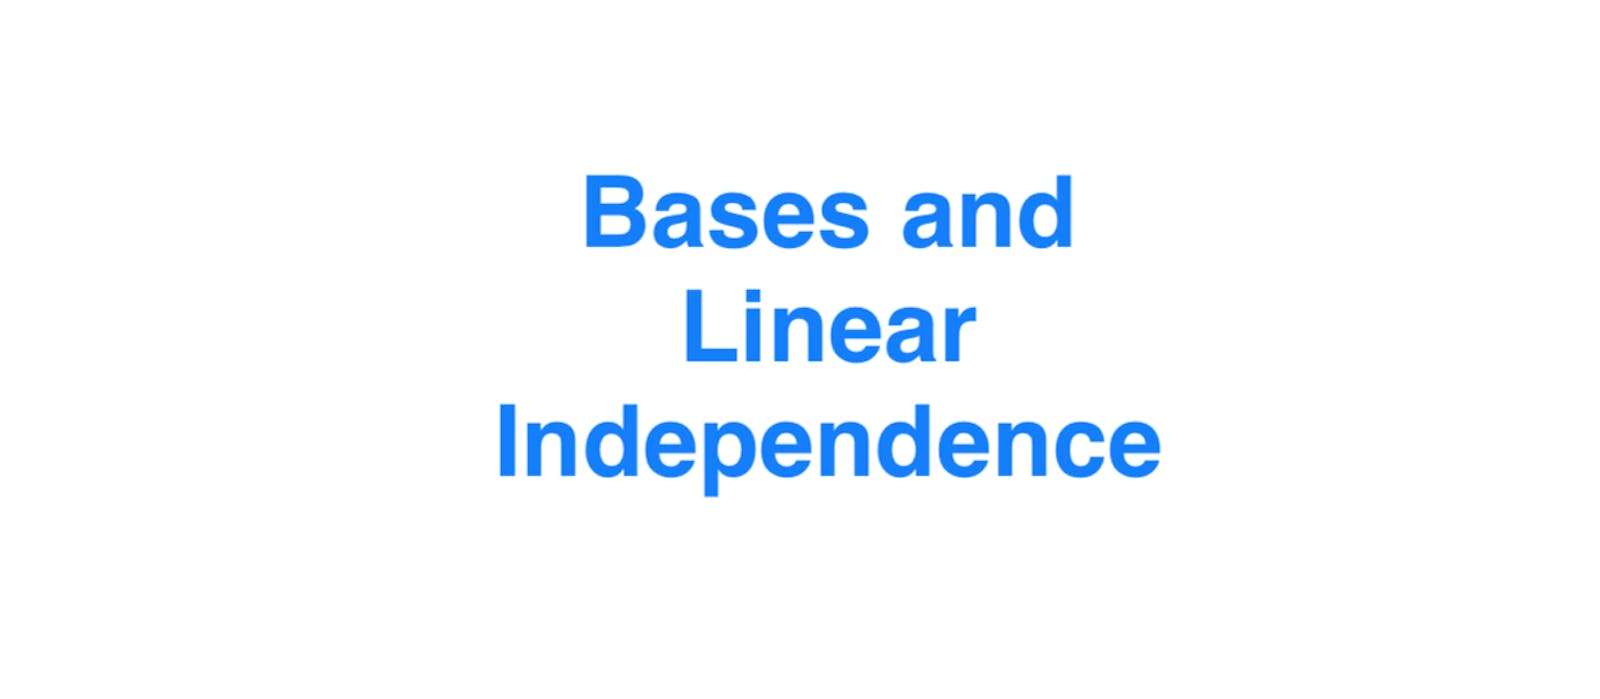 Bases and Linear Independence